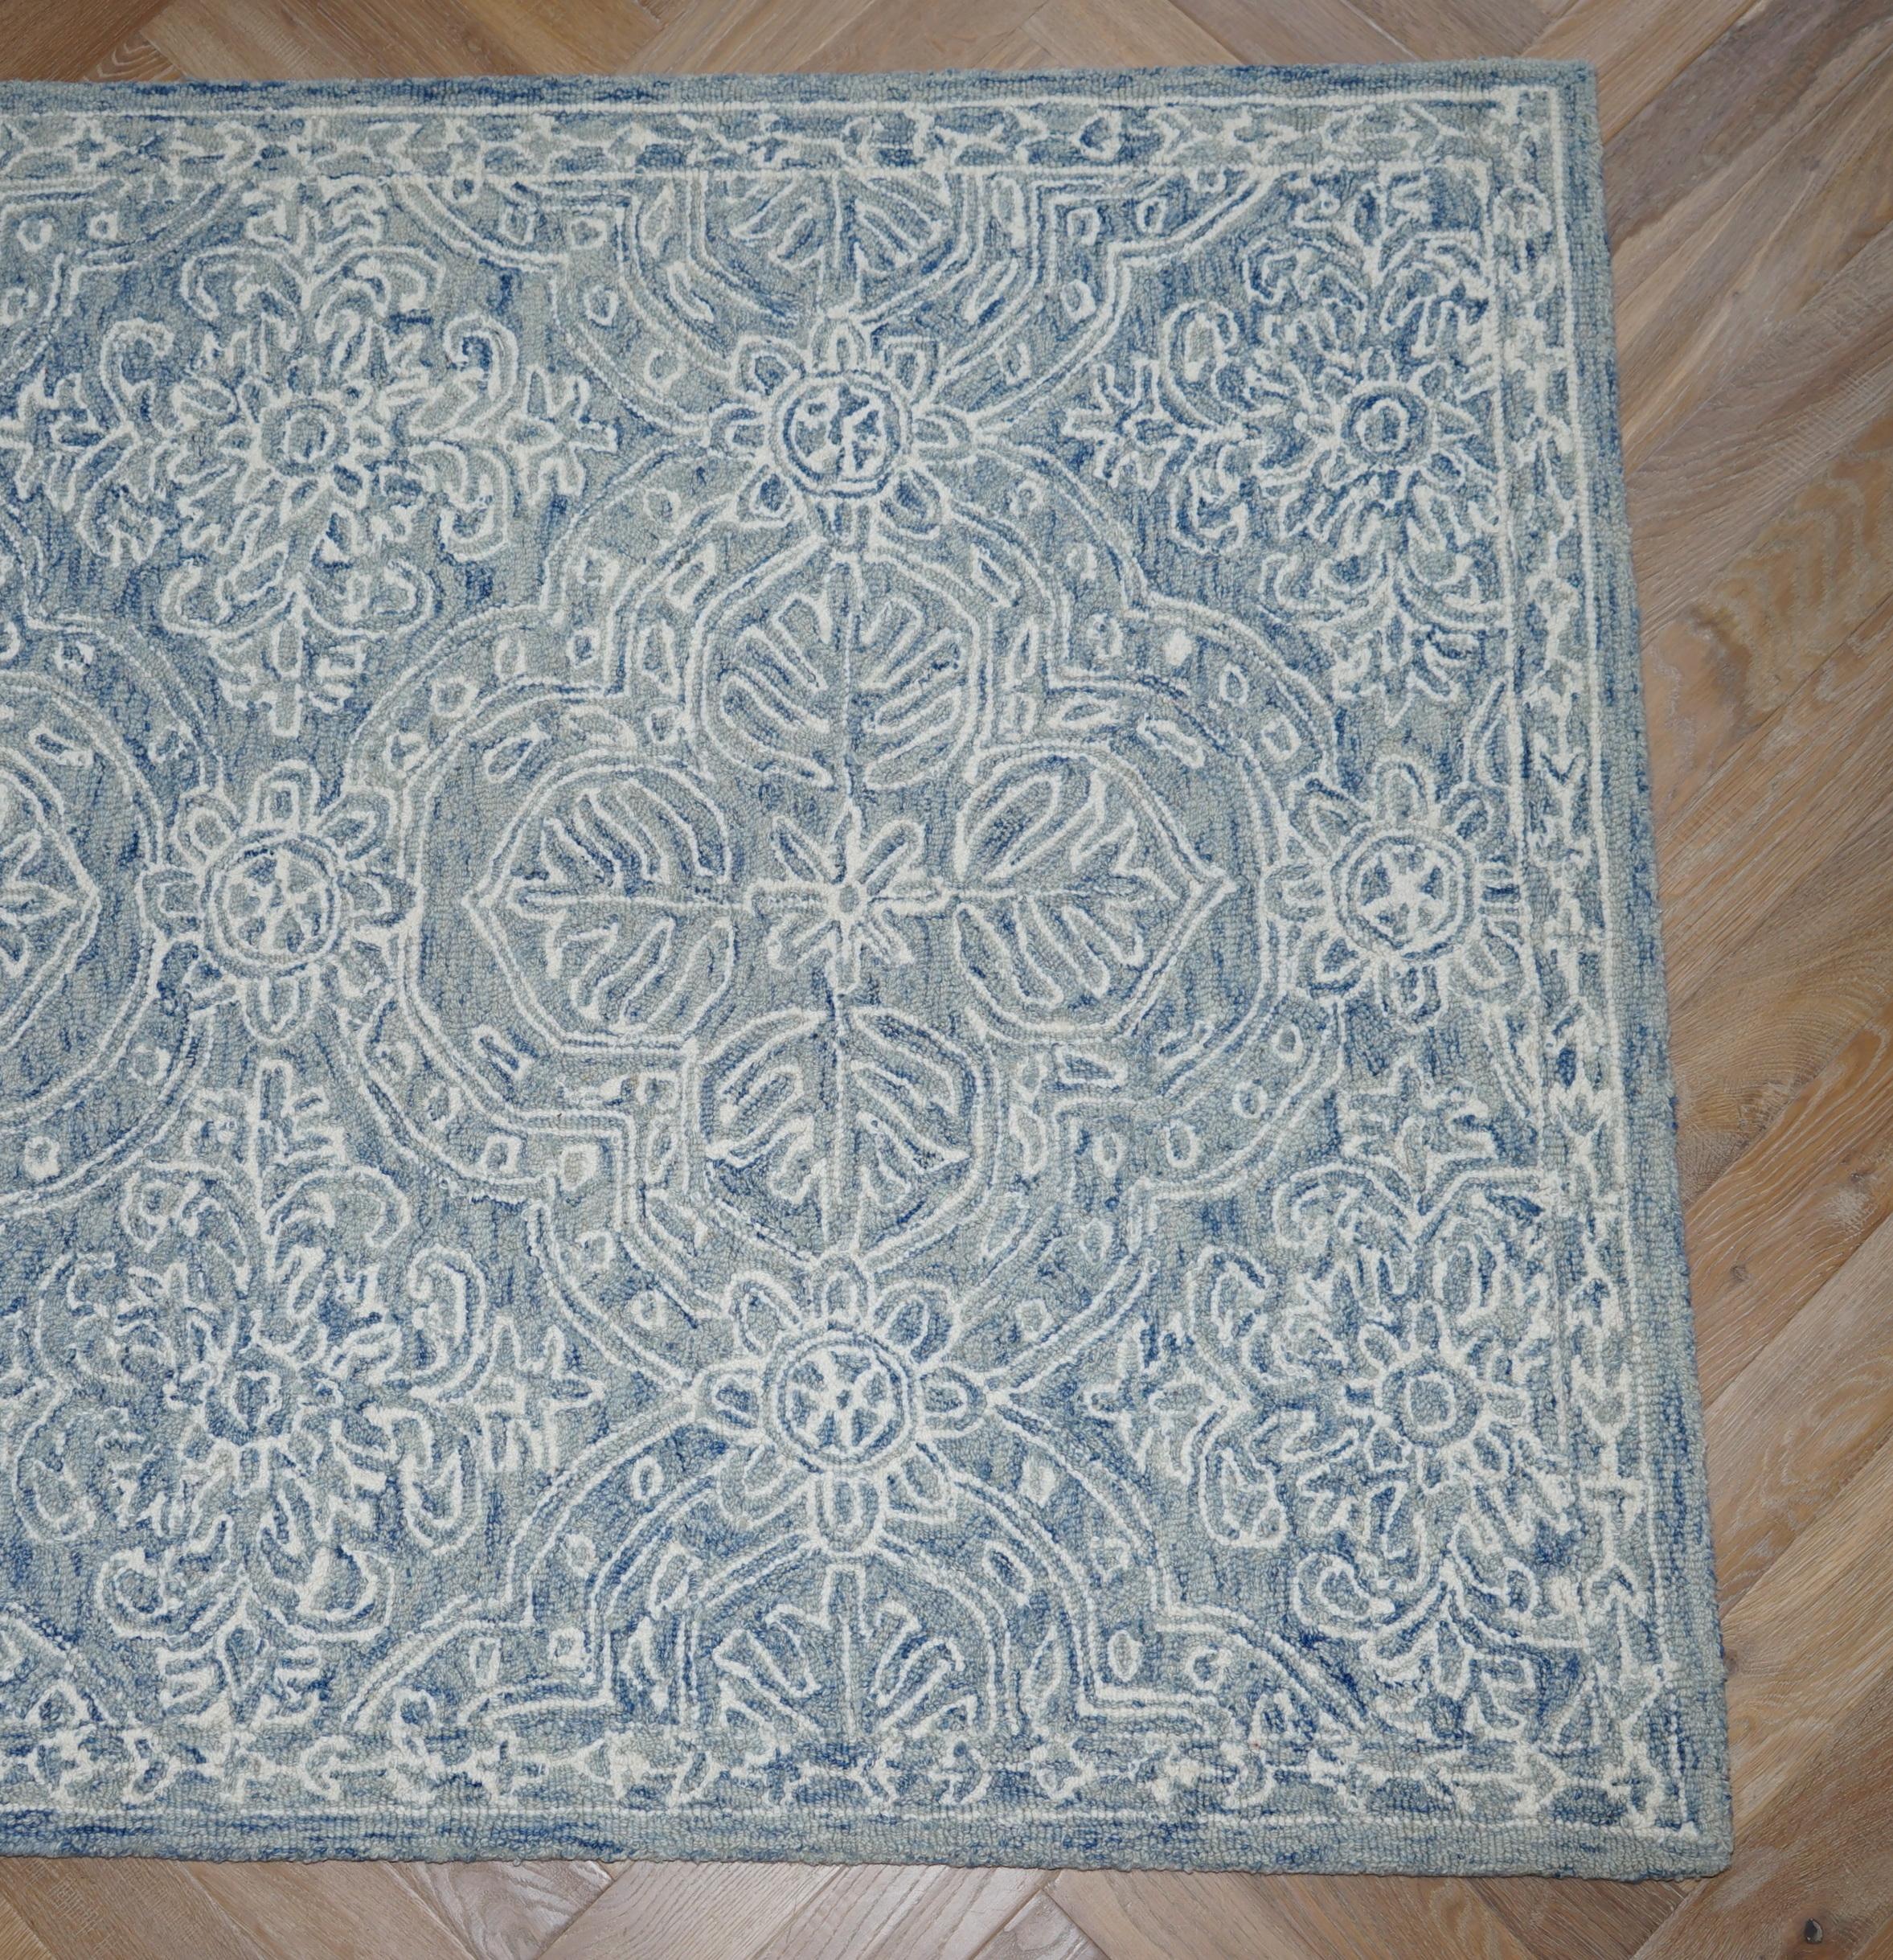 Indian Ralph Lauren 100% Wool Pile Rug Chinese Blue Ivory Finish